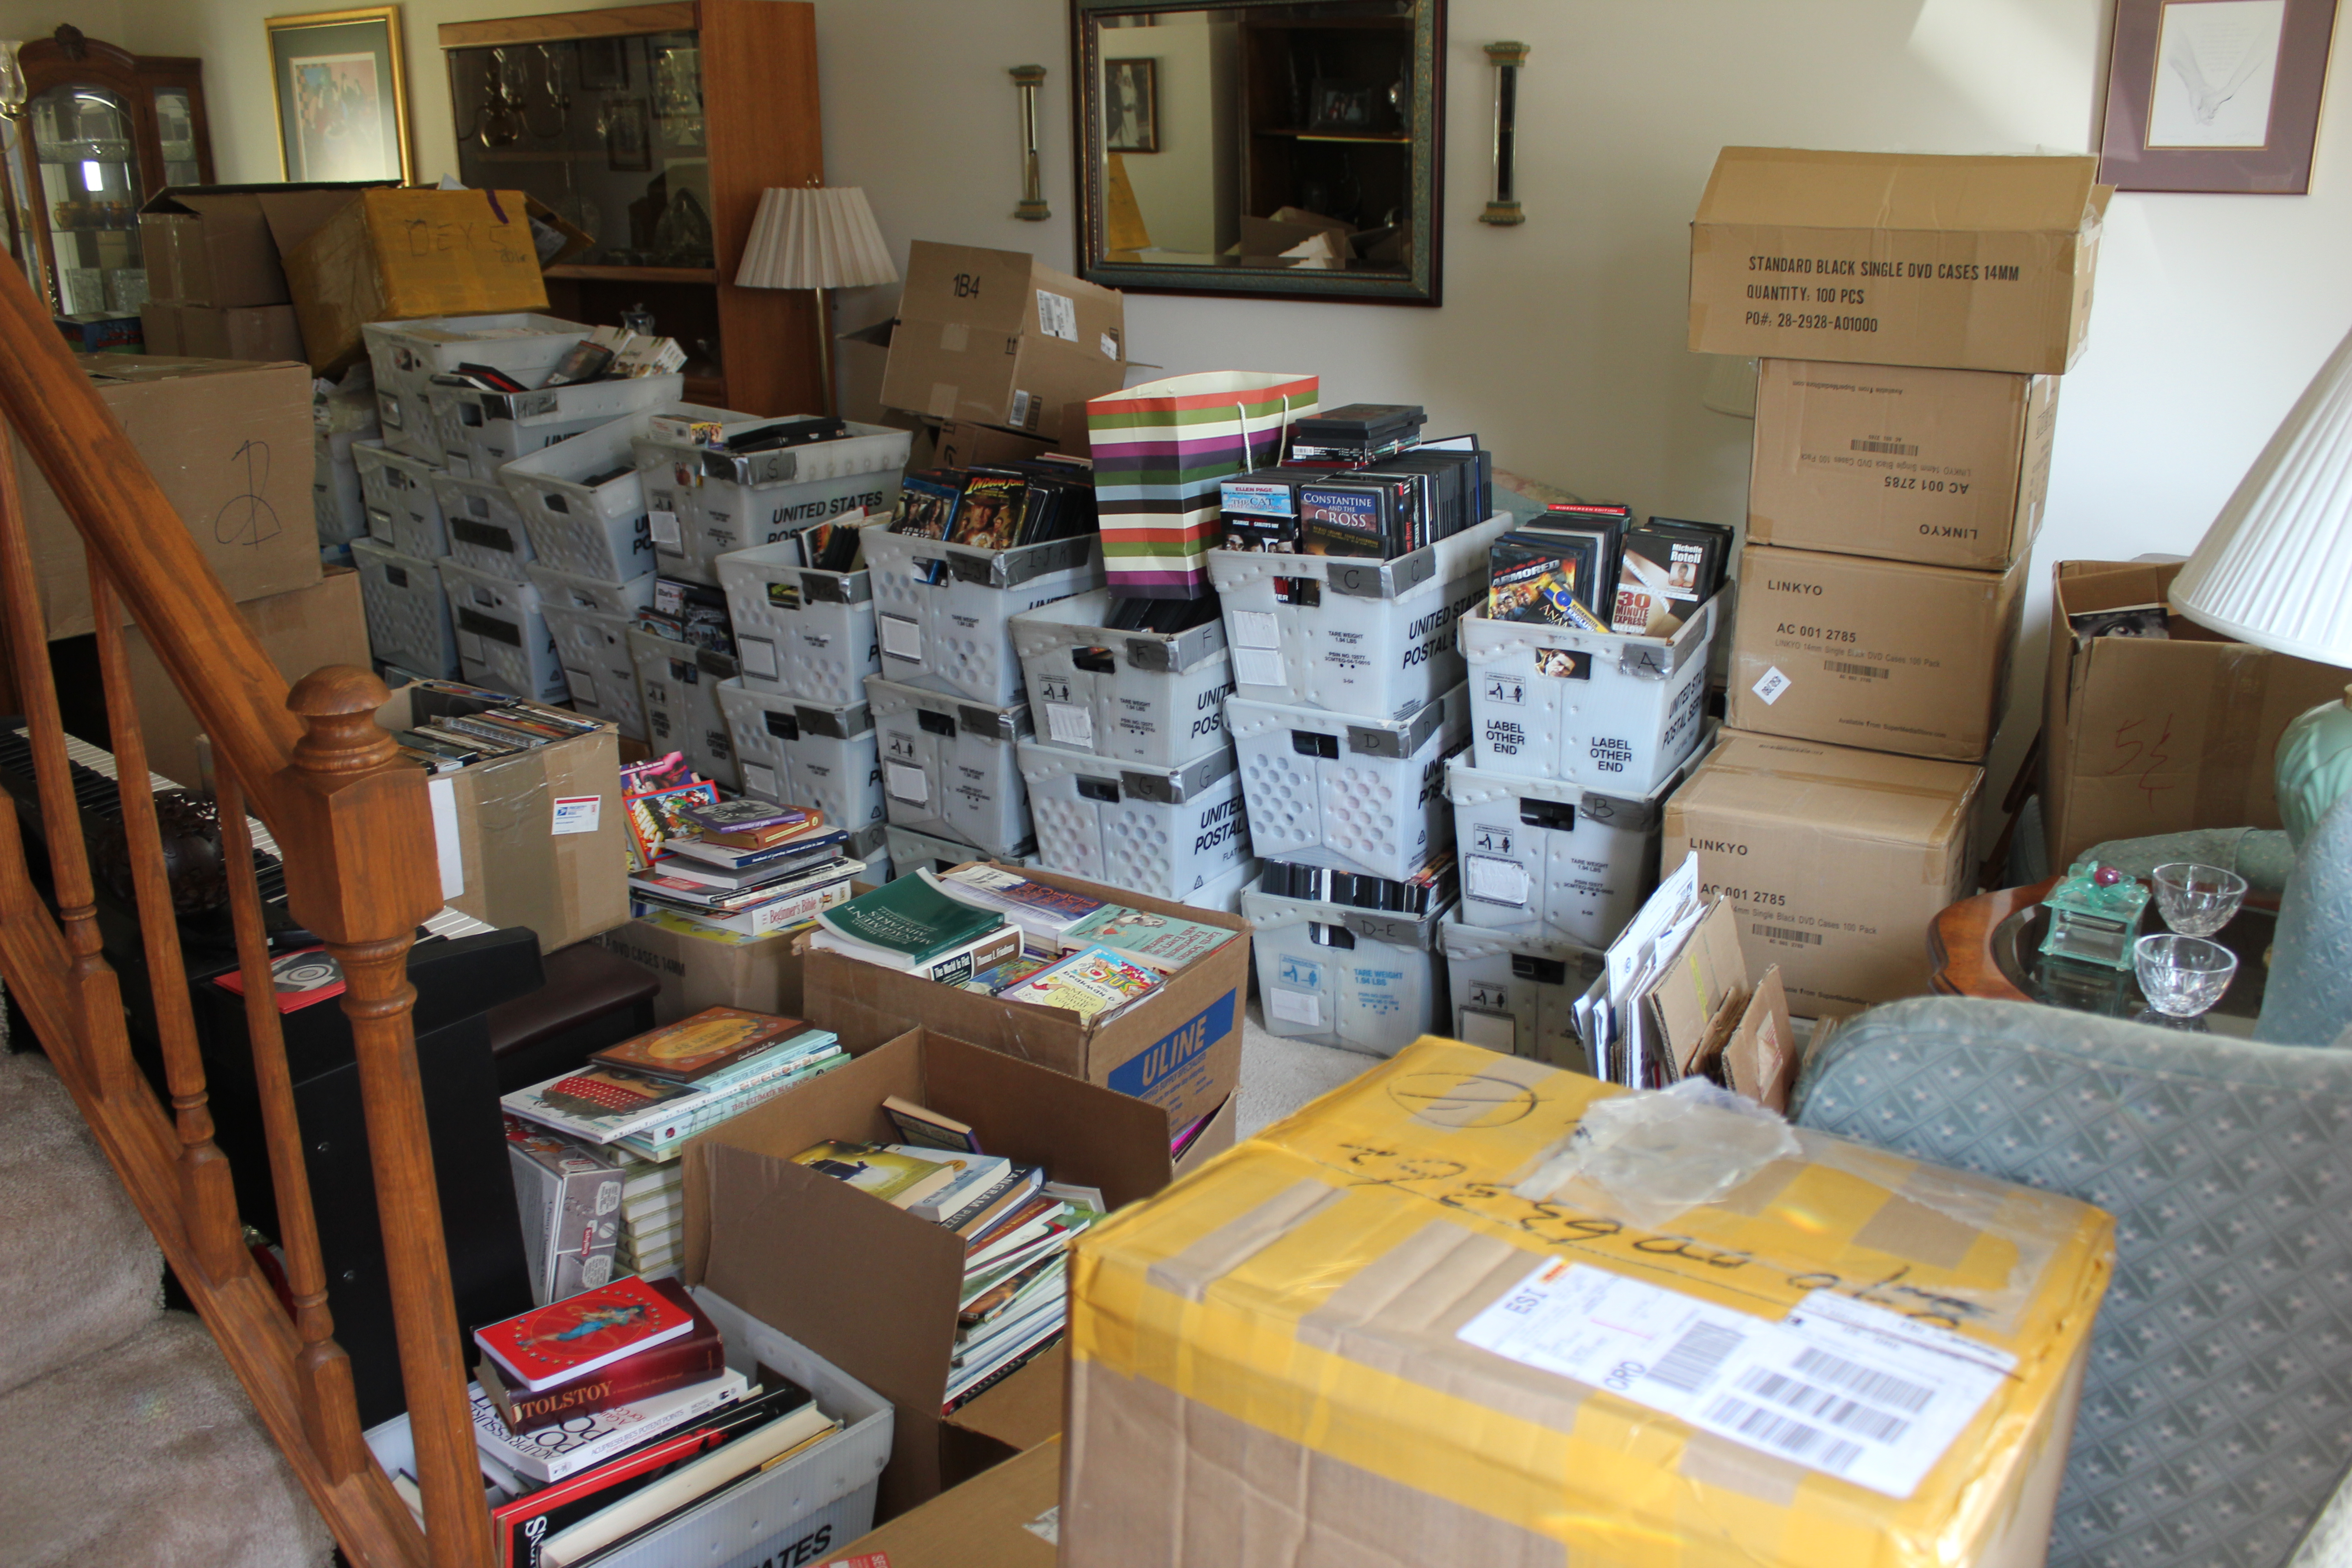 More than 100,000 counterfeit DVDs of movies and television shows were found in Joseph Palmisano’s home in Bartlett, Ill., making it one of the largest counterfeit DVD seizures in the Midwest. All photos in this gallery courtesy of Bartlett, Ill., Police Department